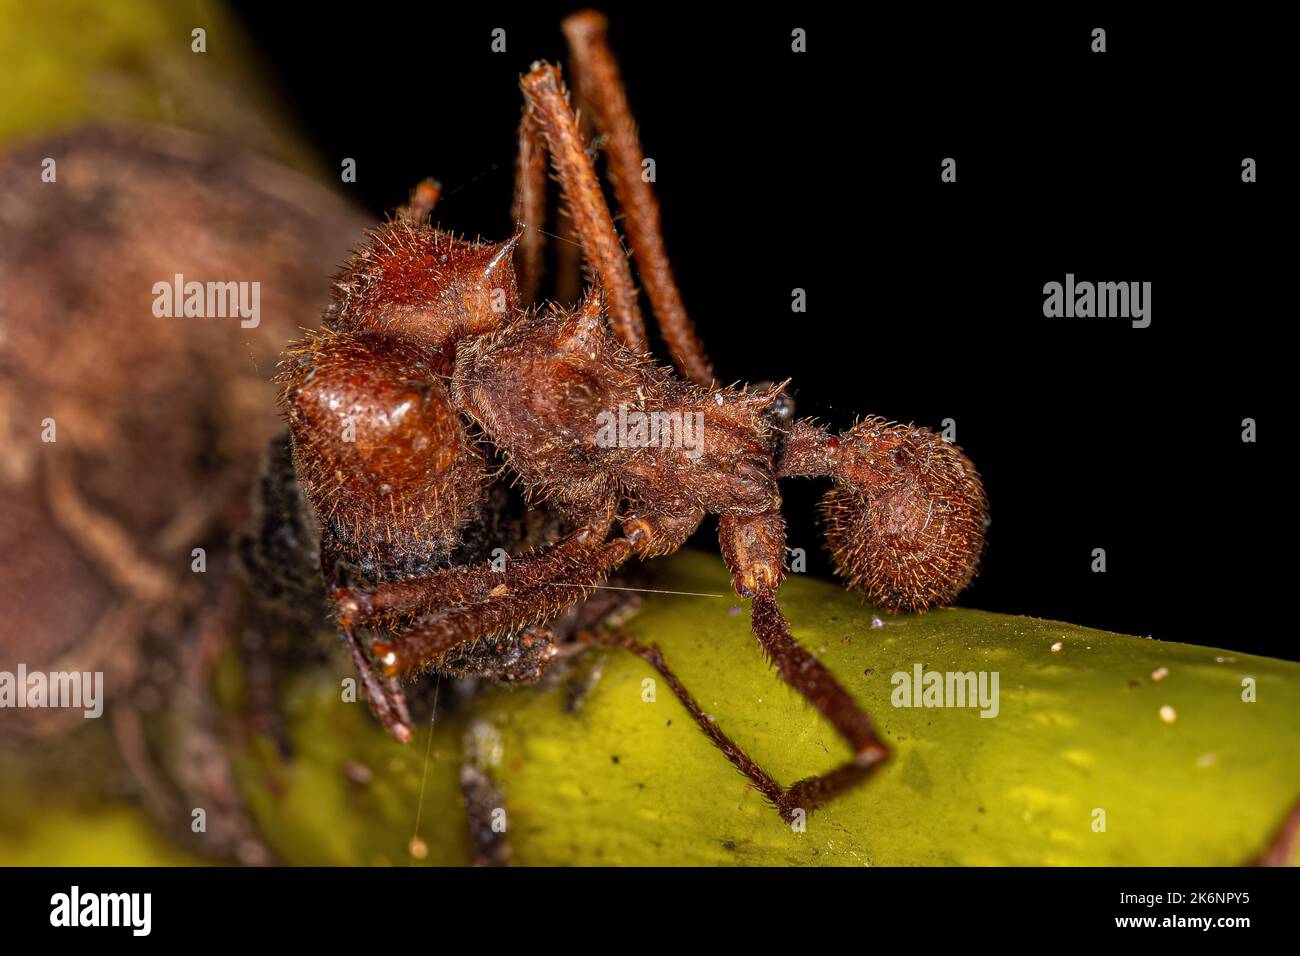 Dead Adult Atta Leaf-cutter Ant of the Genus Atta killed by zombie fungus Stock Photo